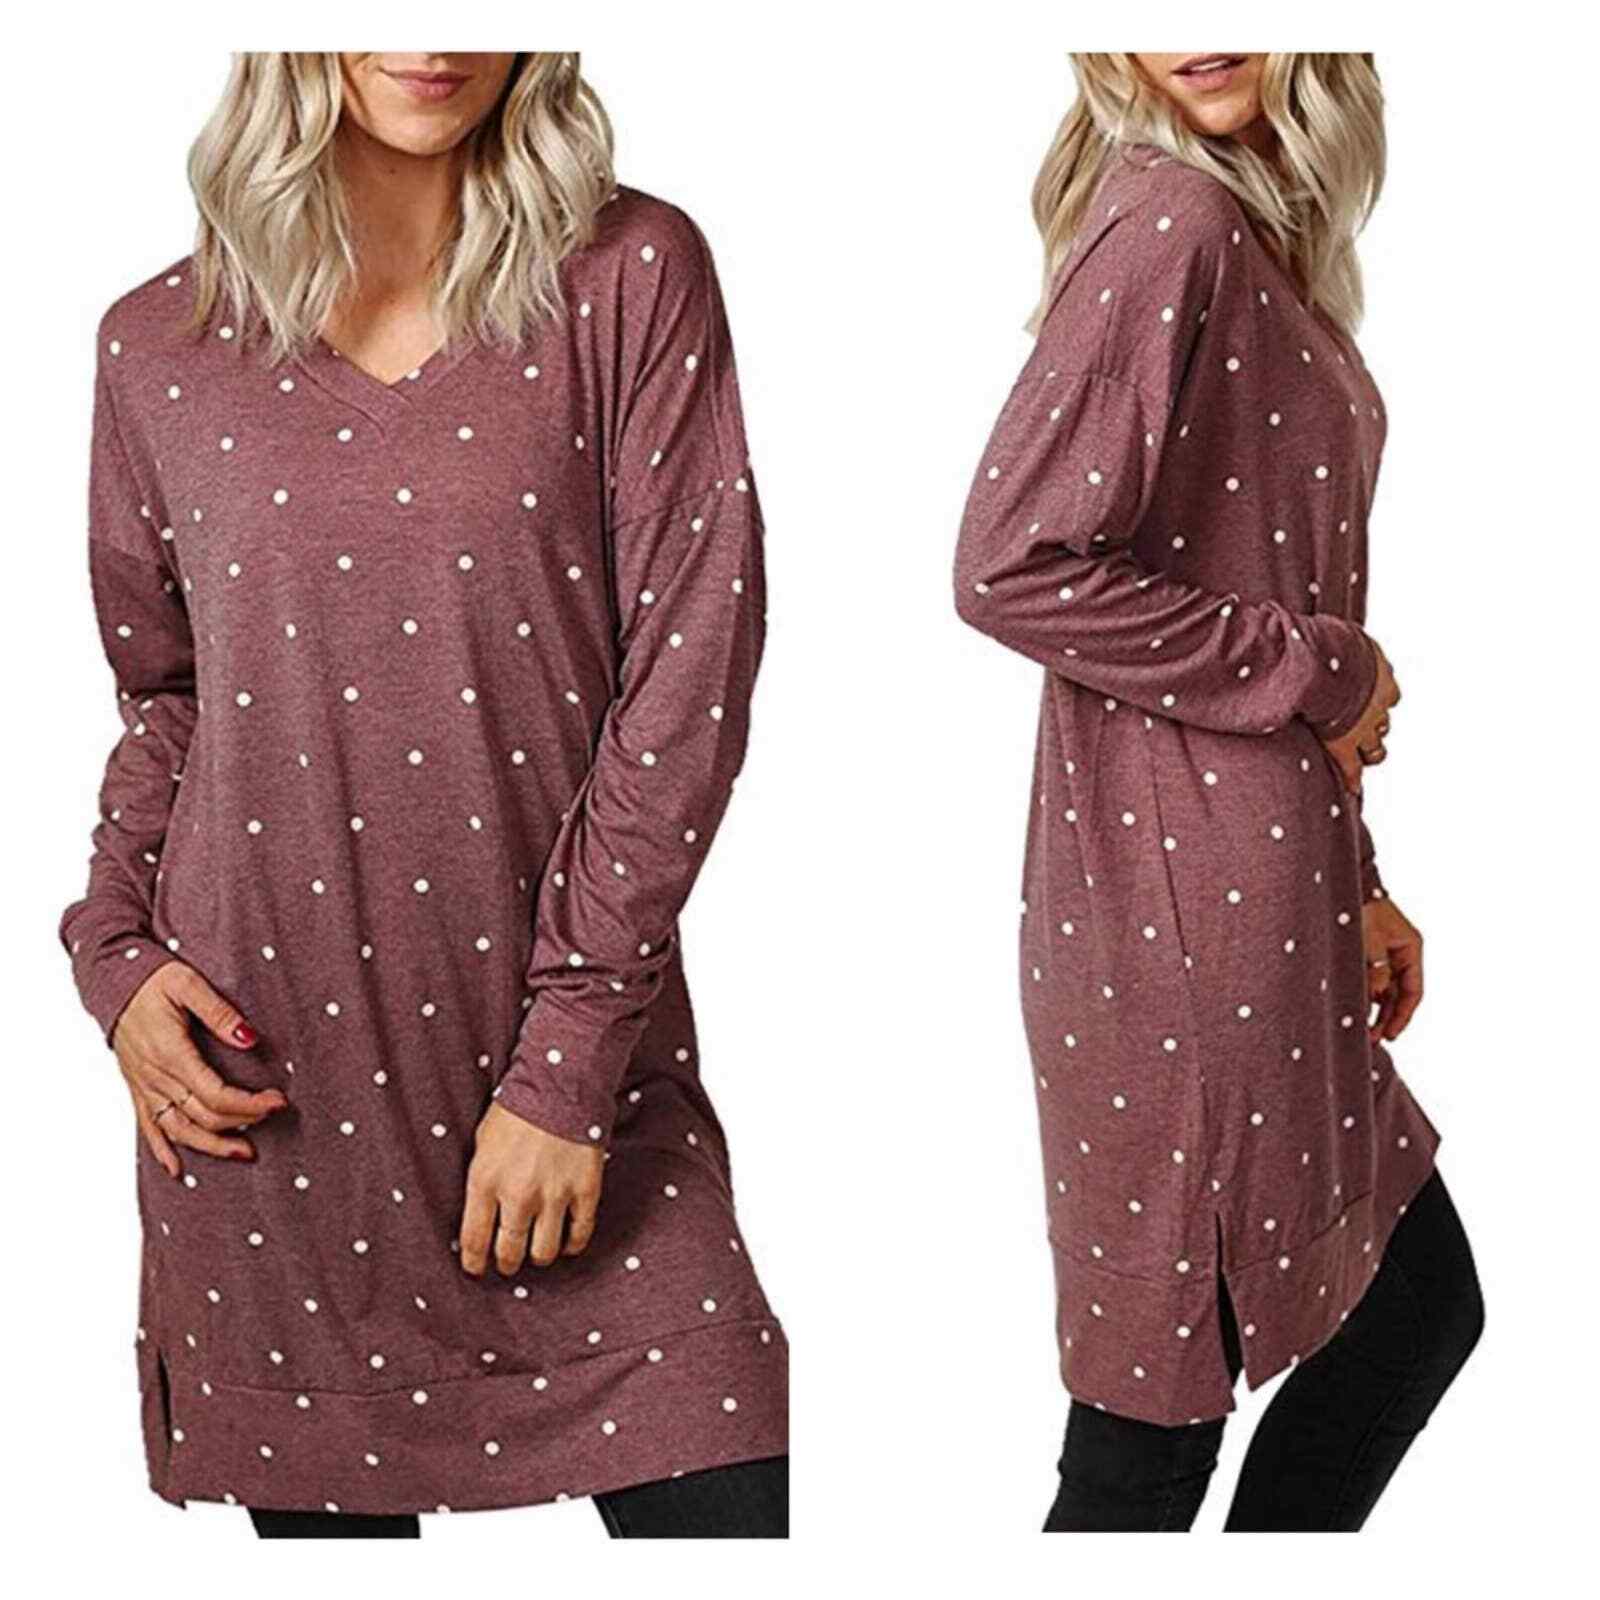 Primary image for NWT Titame long sleeve polka dot tunic top